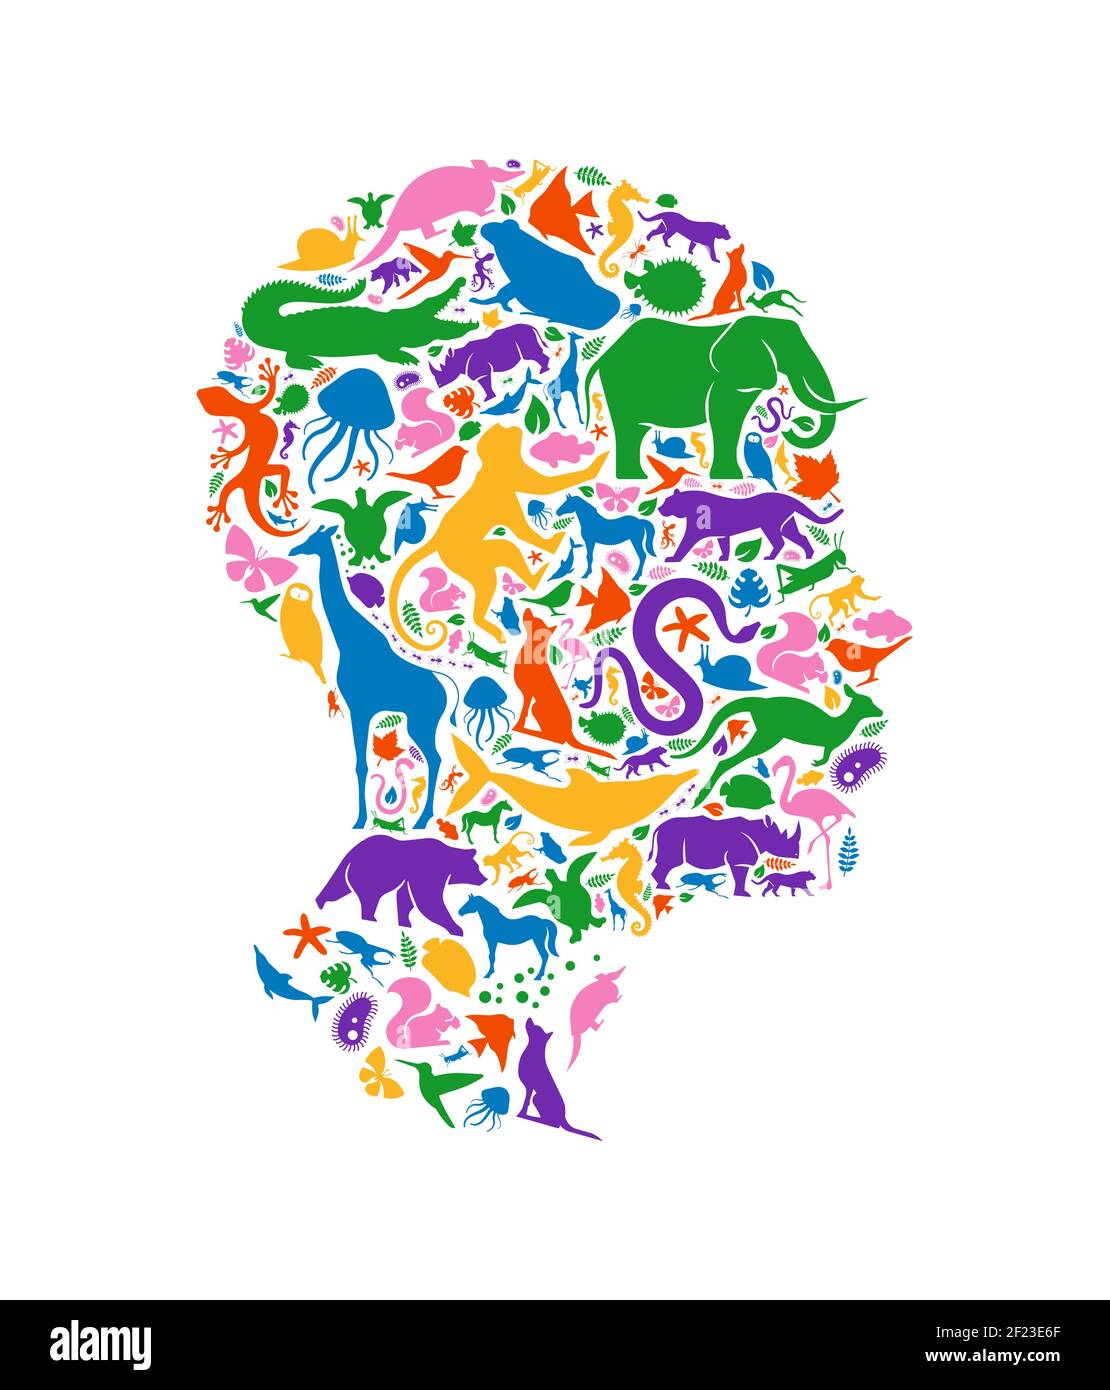 Diverse animal shapes making human head shape on isolated white background. Colorful animals silhouette illustration for wild life diversity concept o Stock Vector